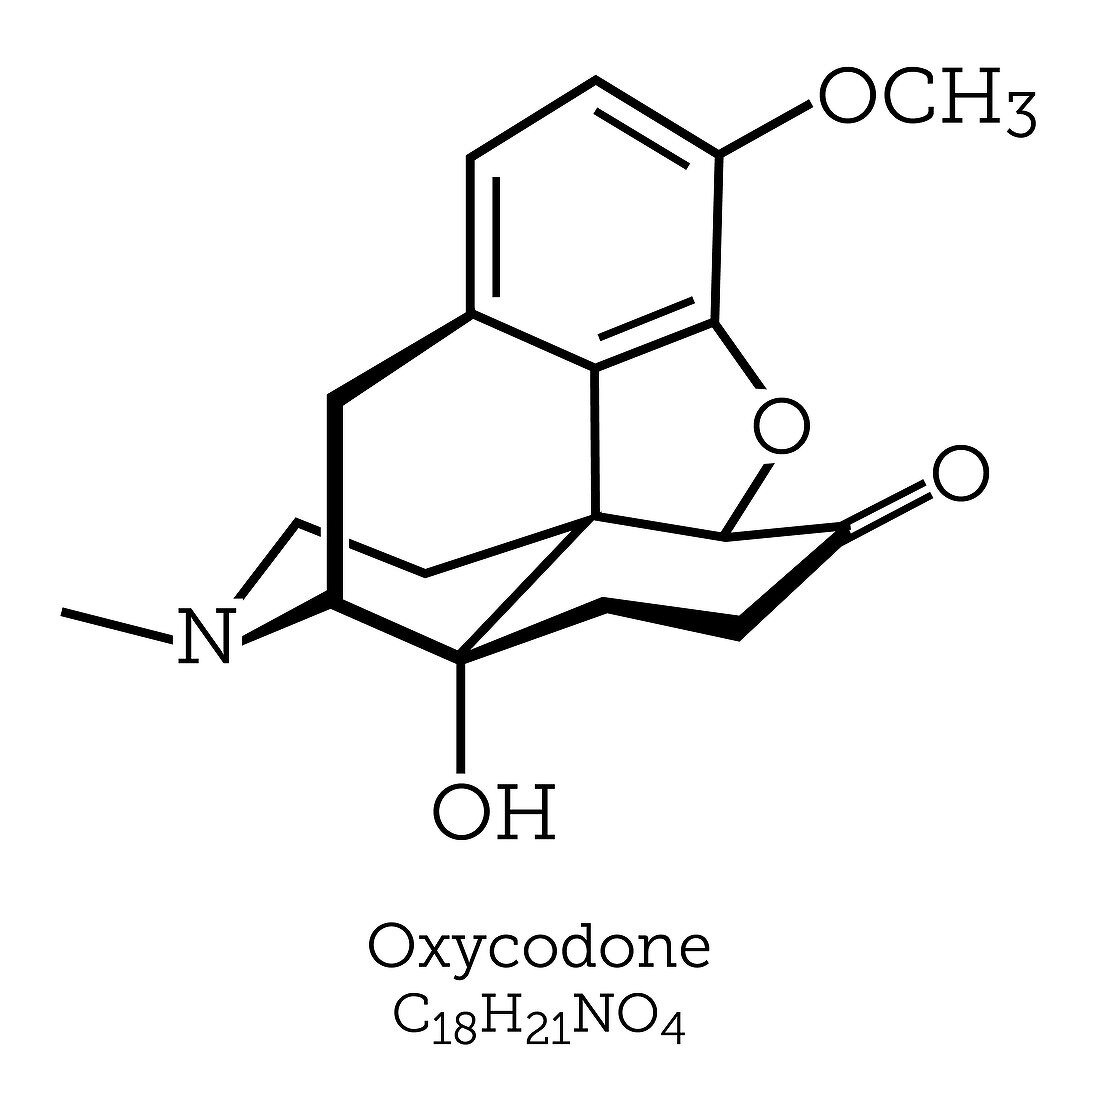 Molecular Structure of Oxycodone